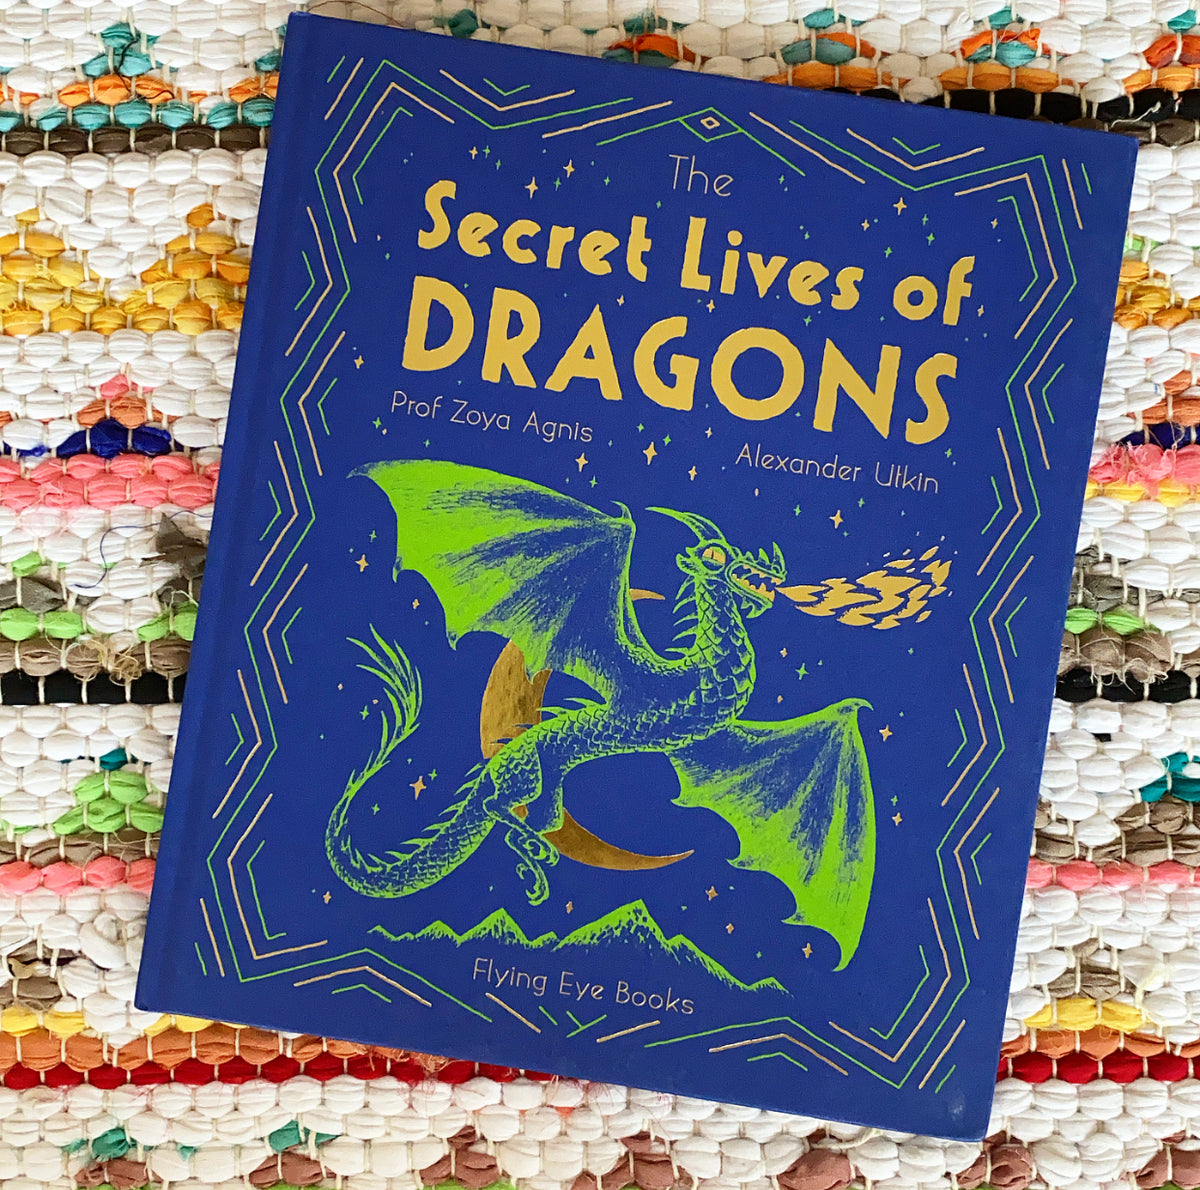 The Secret History Of Dragons